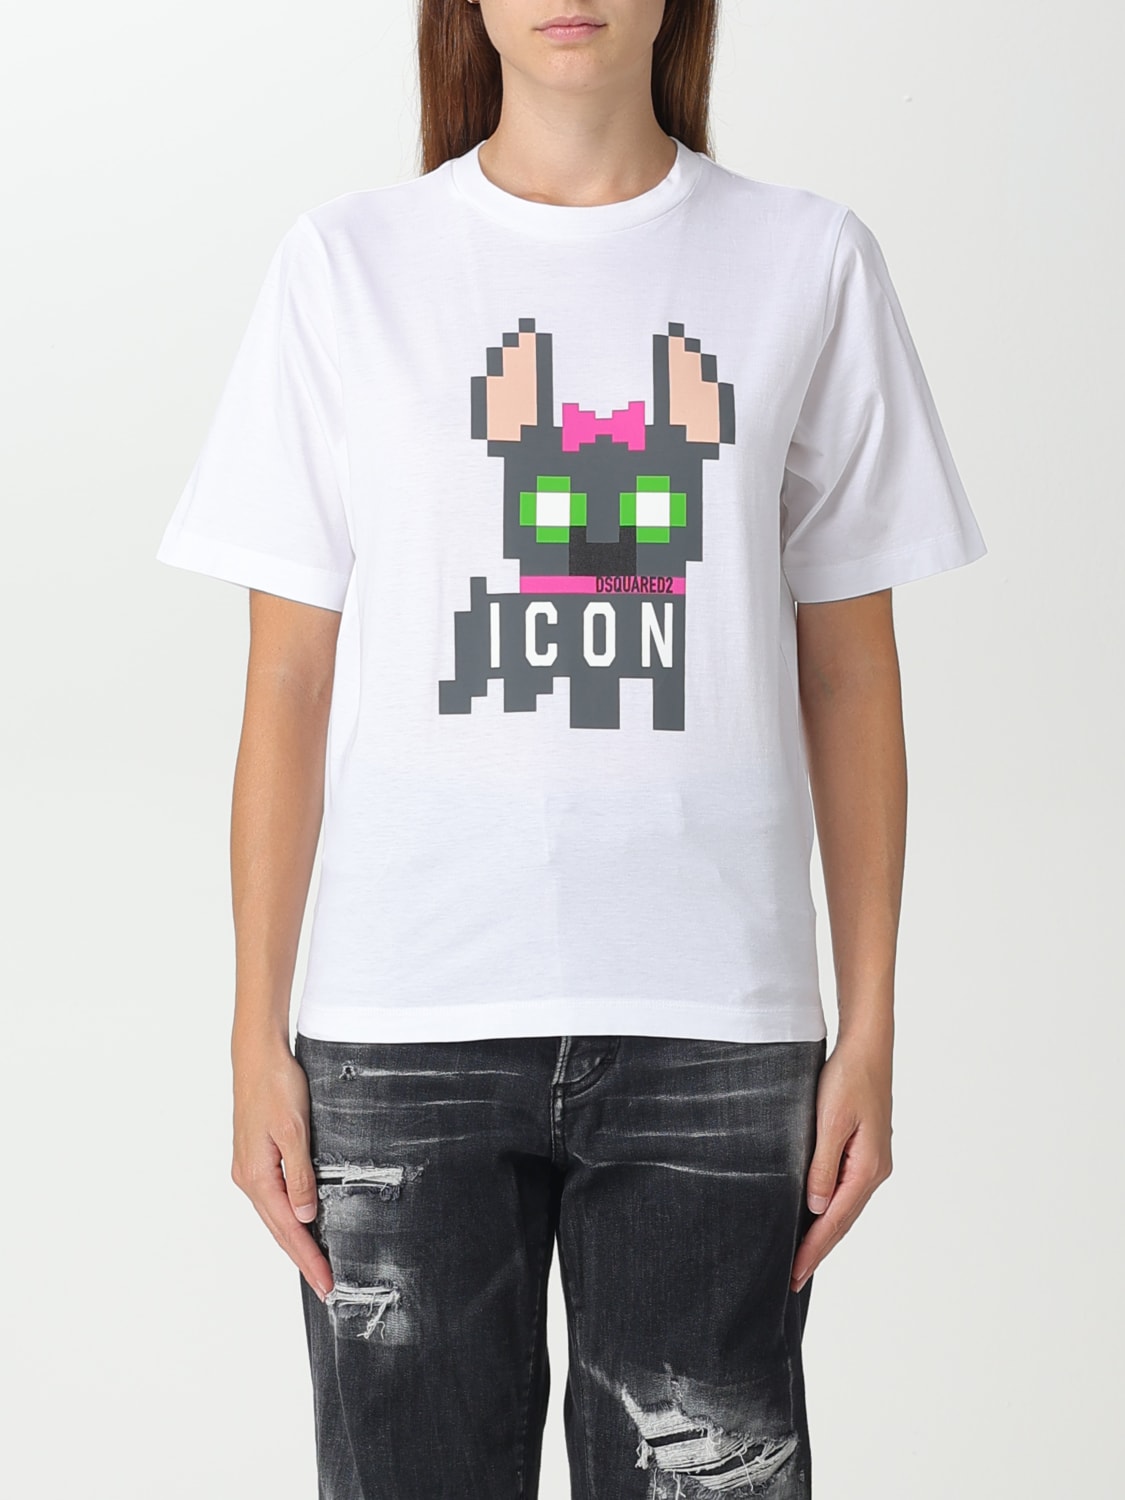 DSQUARED2: Icon T-shirt in cotton - White  Dsquared2 t-shirt  S80GC0061S23009 online at